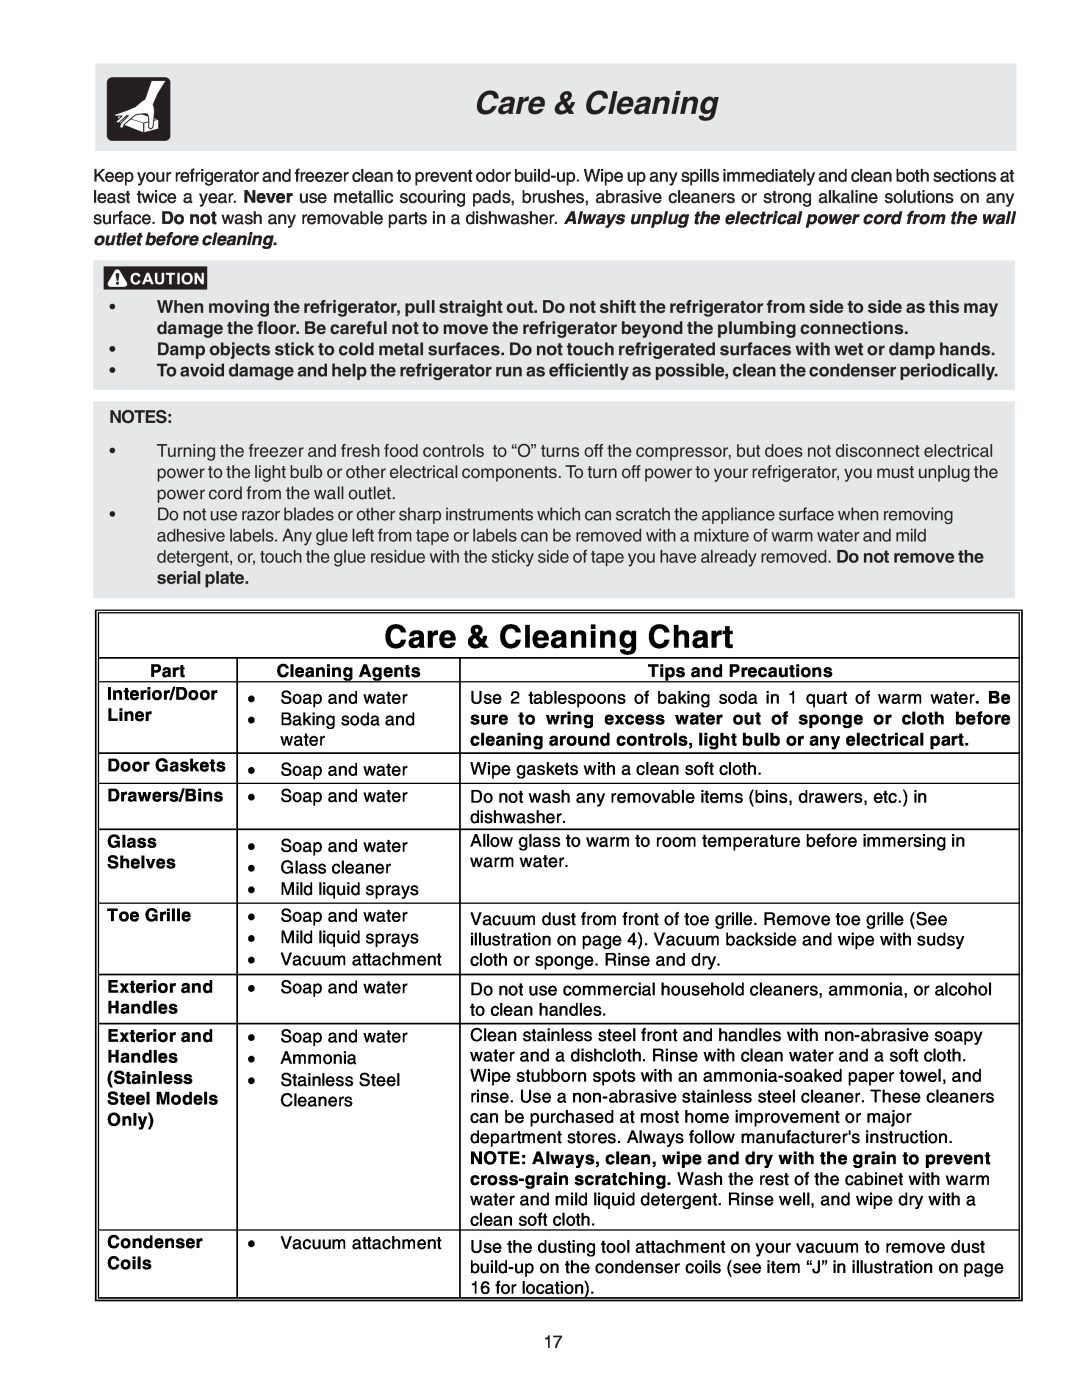 Electrolux - Gibson 241512200A warranty Care & Cleaning Chart 